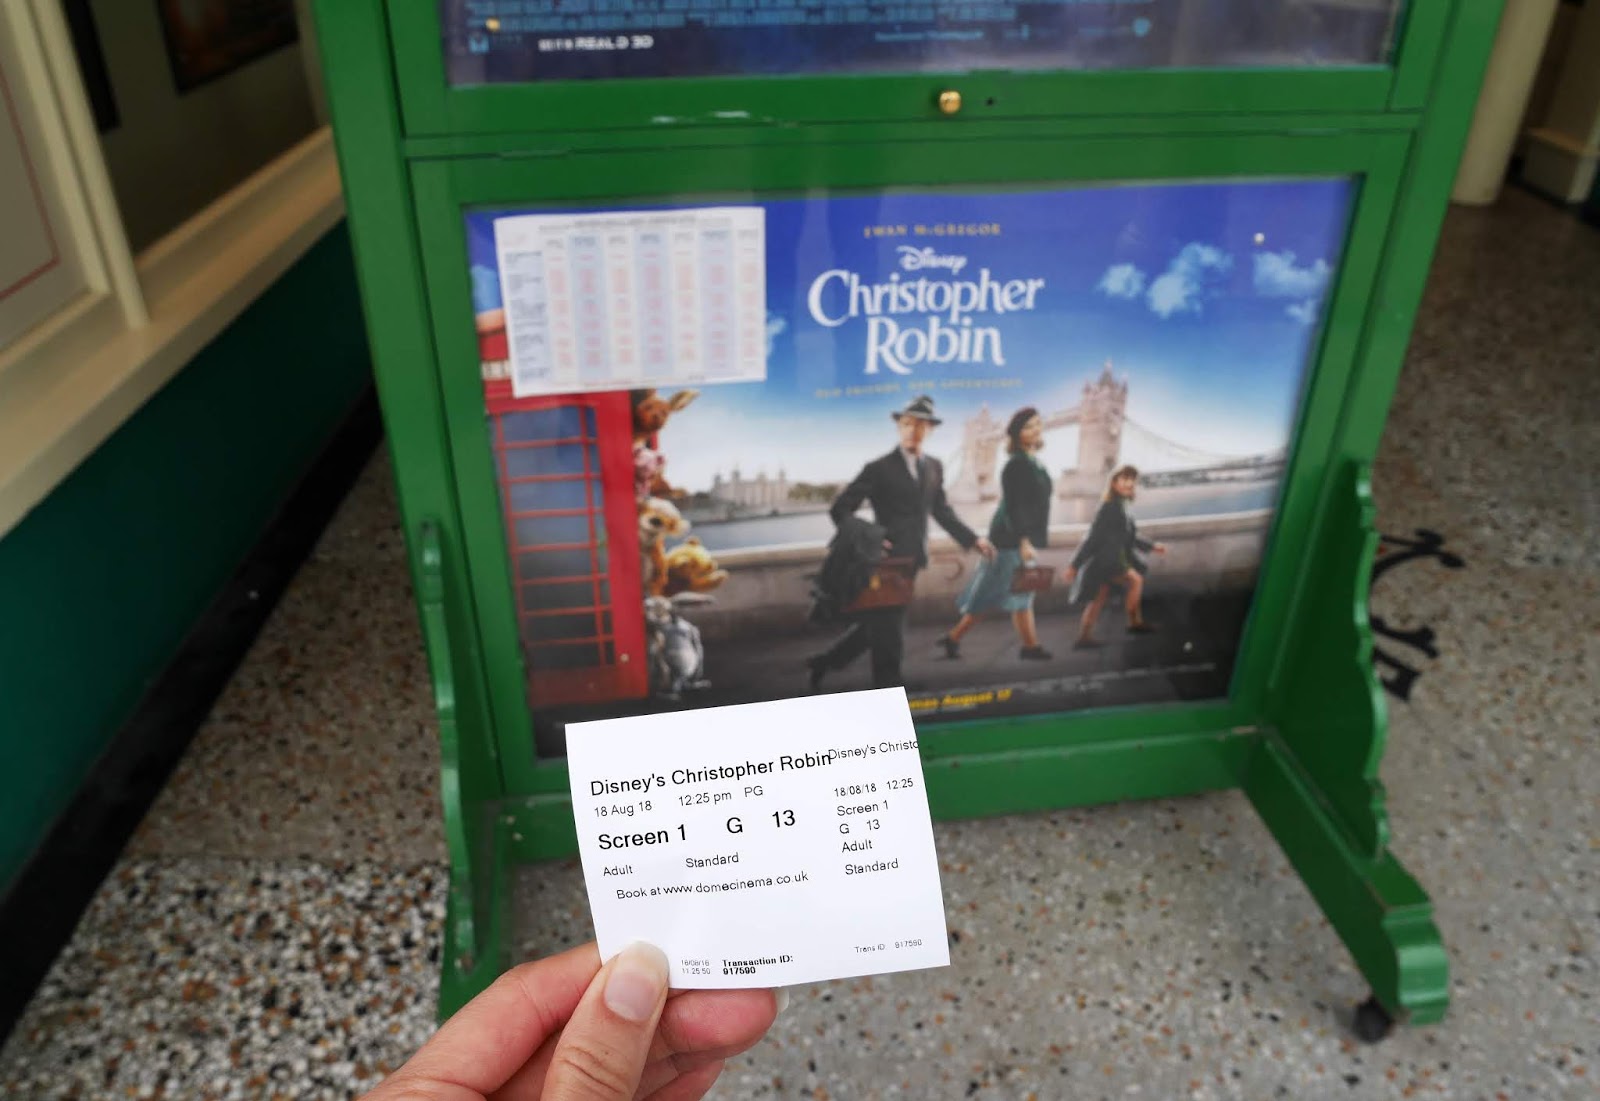 Holding my Christopher Robin cinema ticket outside The Dome Cinema in Worthing